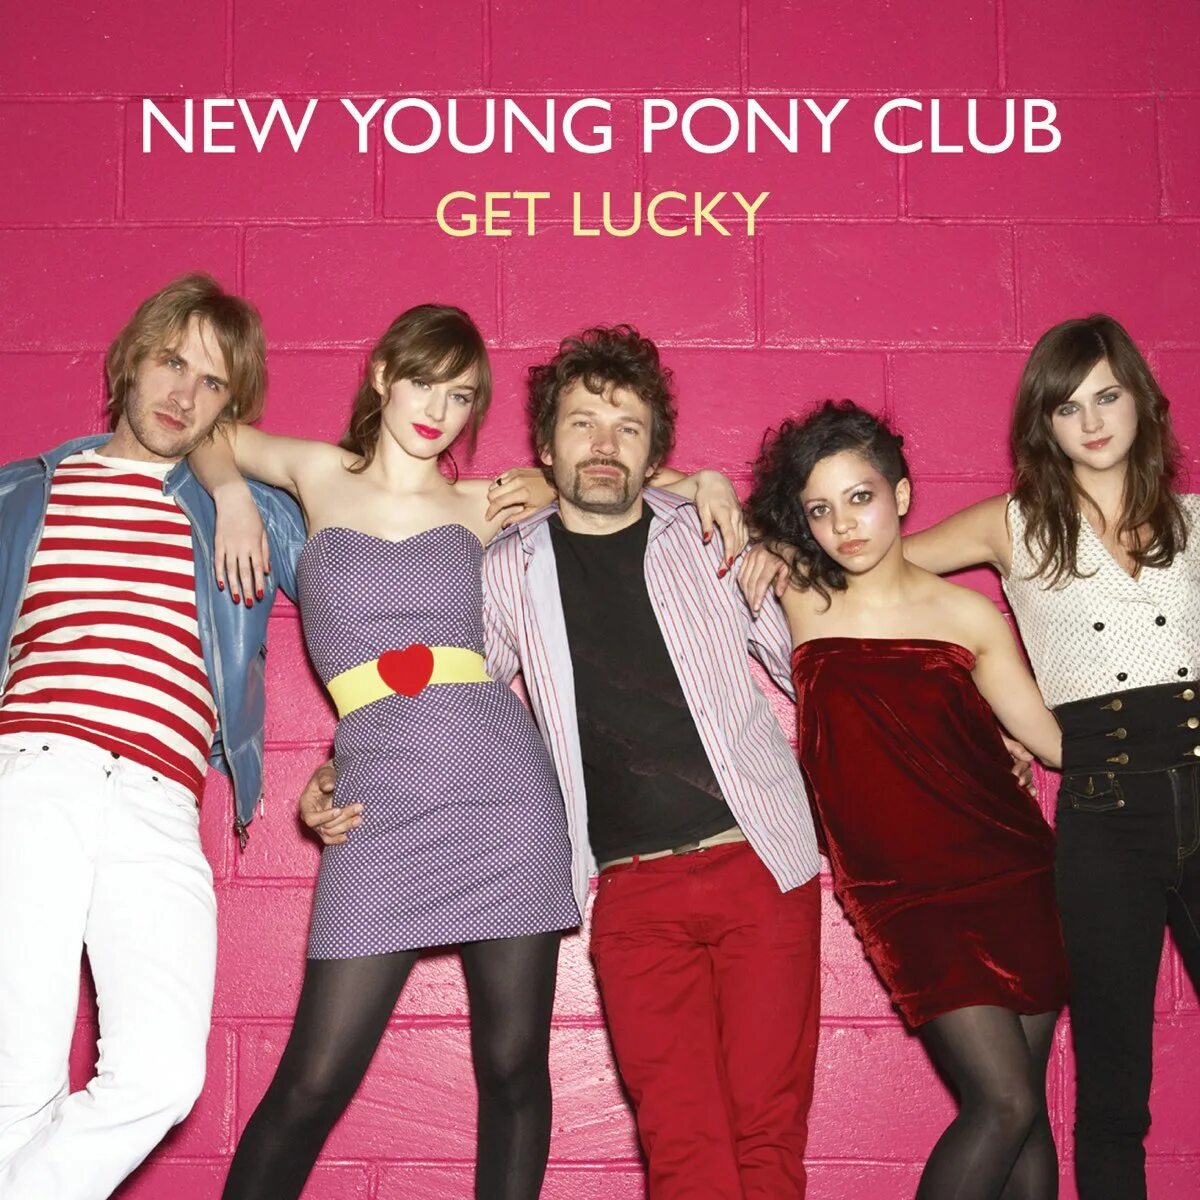 Daughter get lucky. New Rave. Нью рейверы. Get Lucky New young Pony Club. New young бренд.